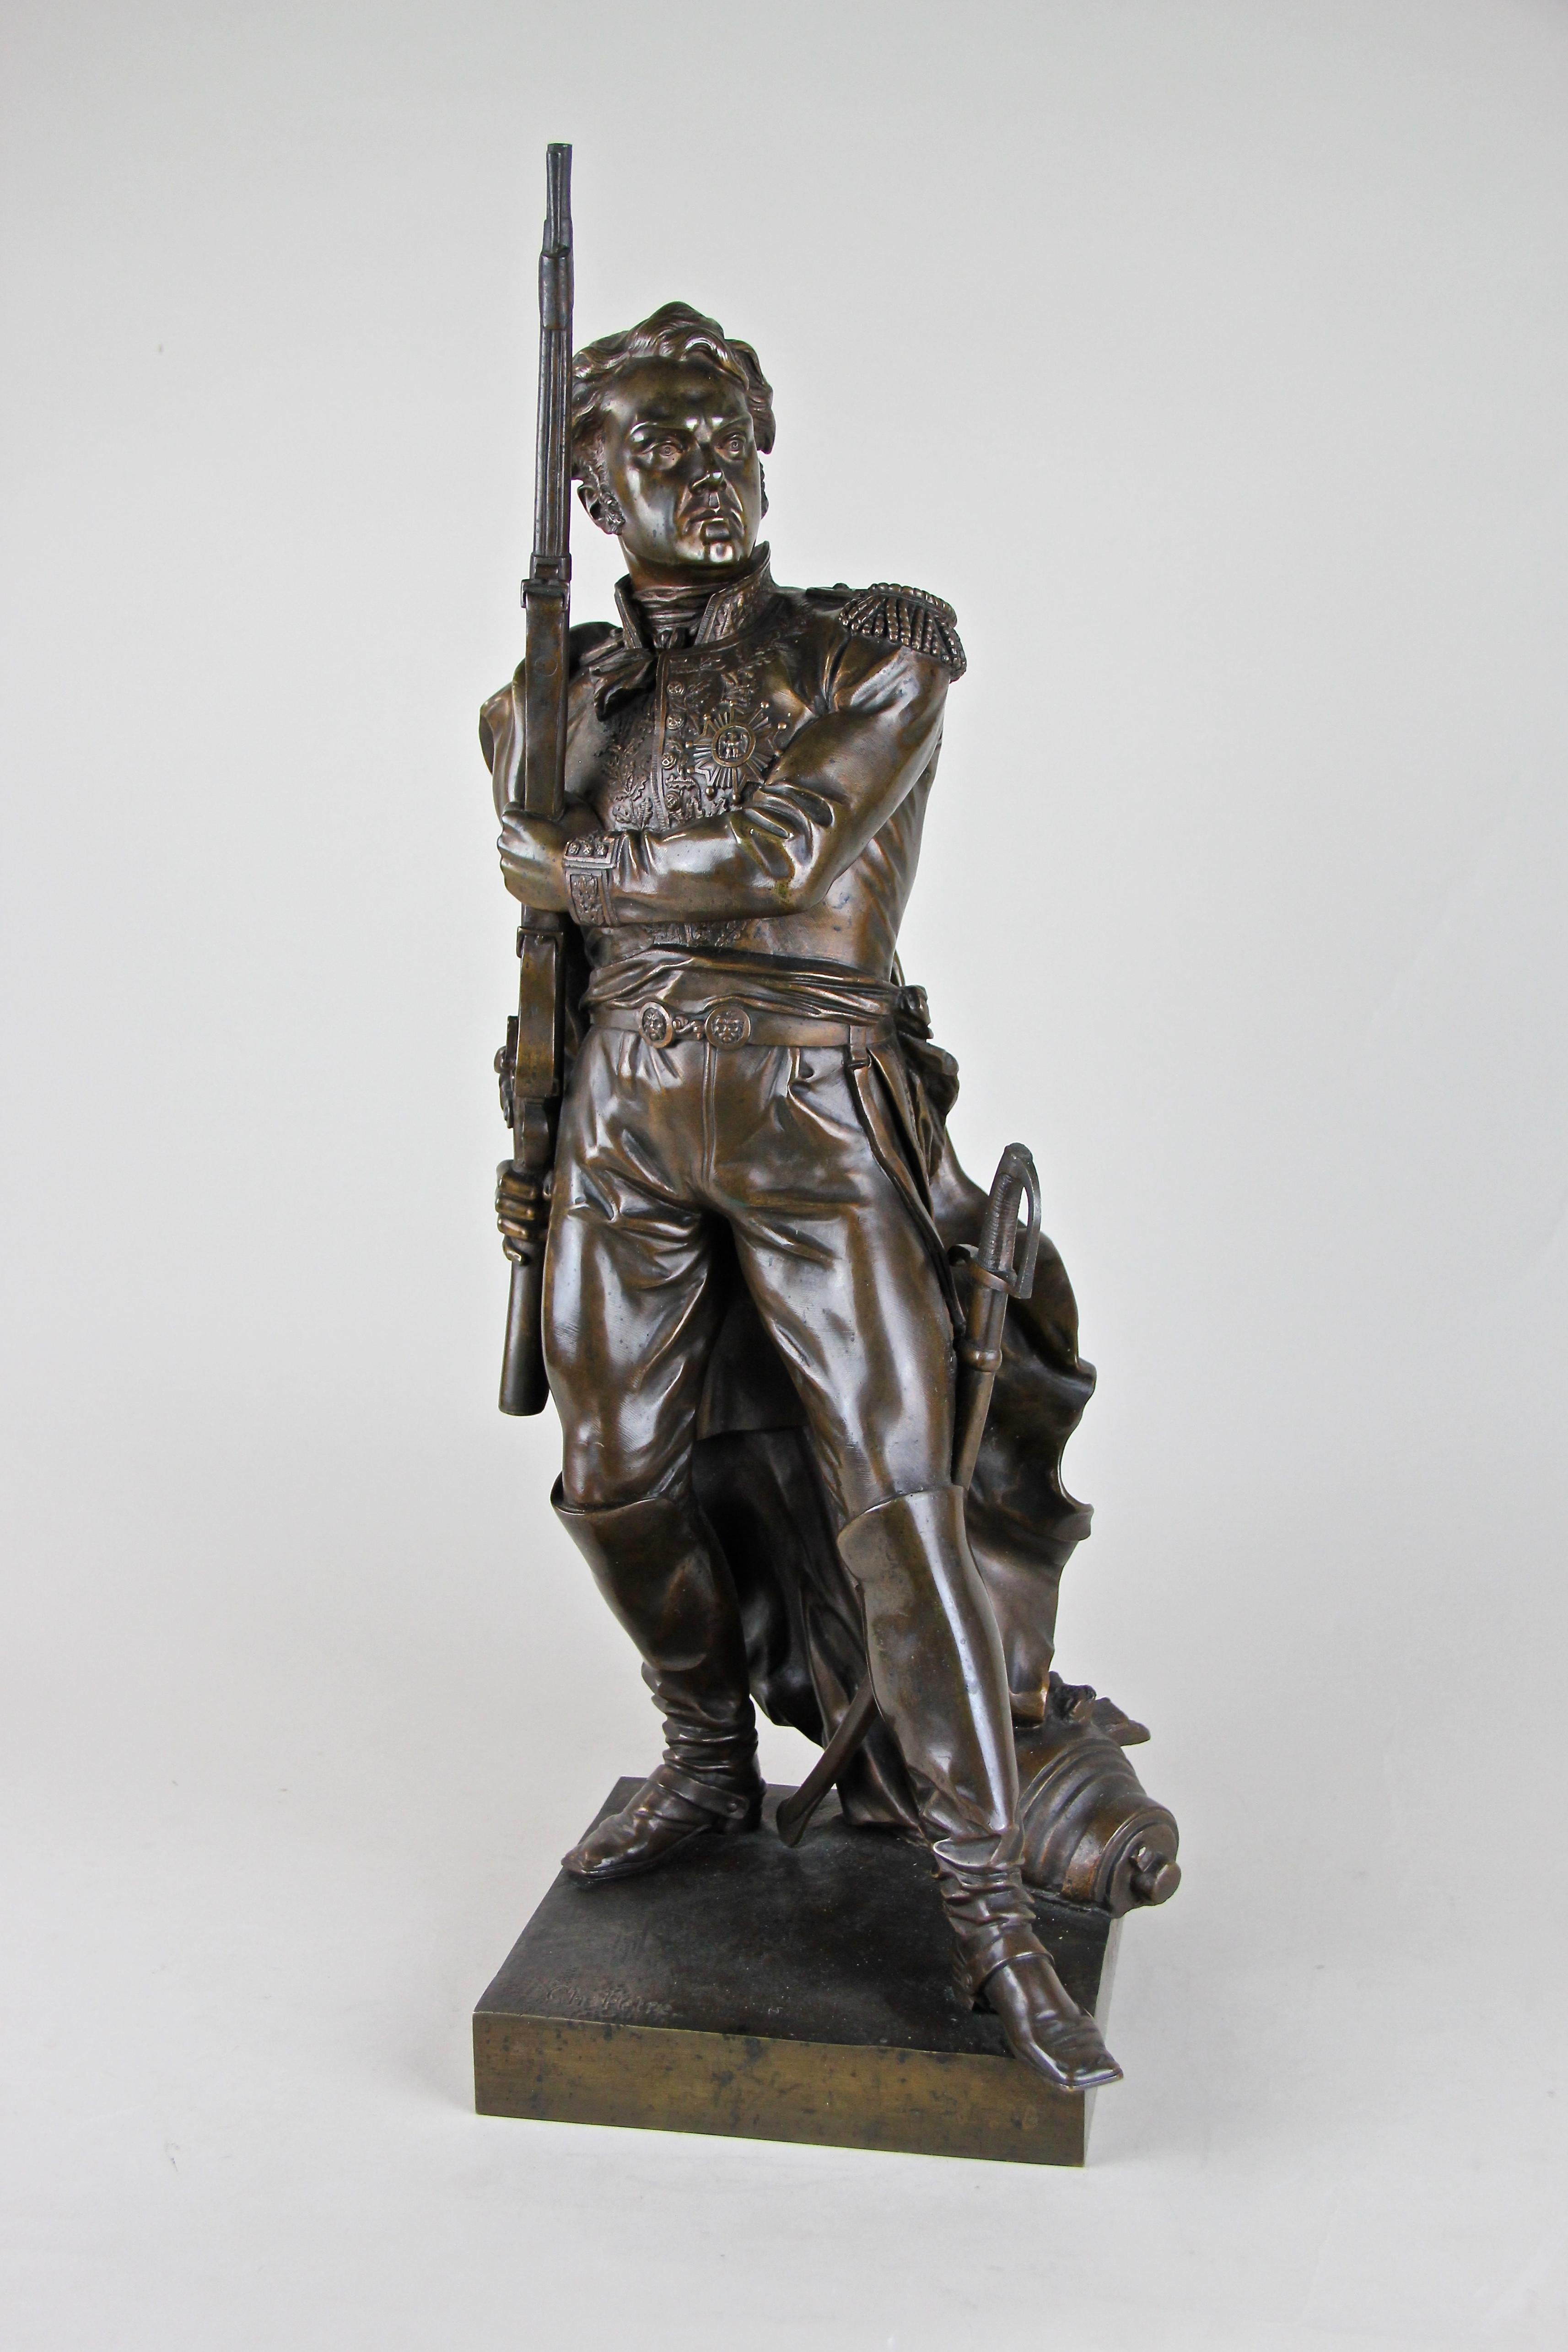 An outstanding worked bronze sculpture of a Napoleonic era French soldier. Made by famous French sculptor Charles Petre, circa 1870, this imperial officer is portrayed with his rifle in hand standing over a fallen cannon. The look of his uniform,